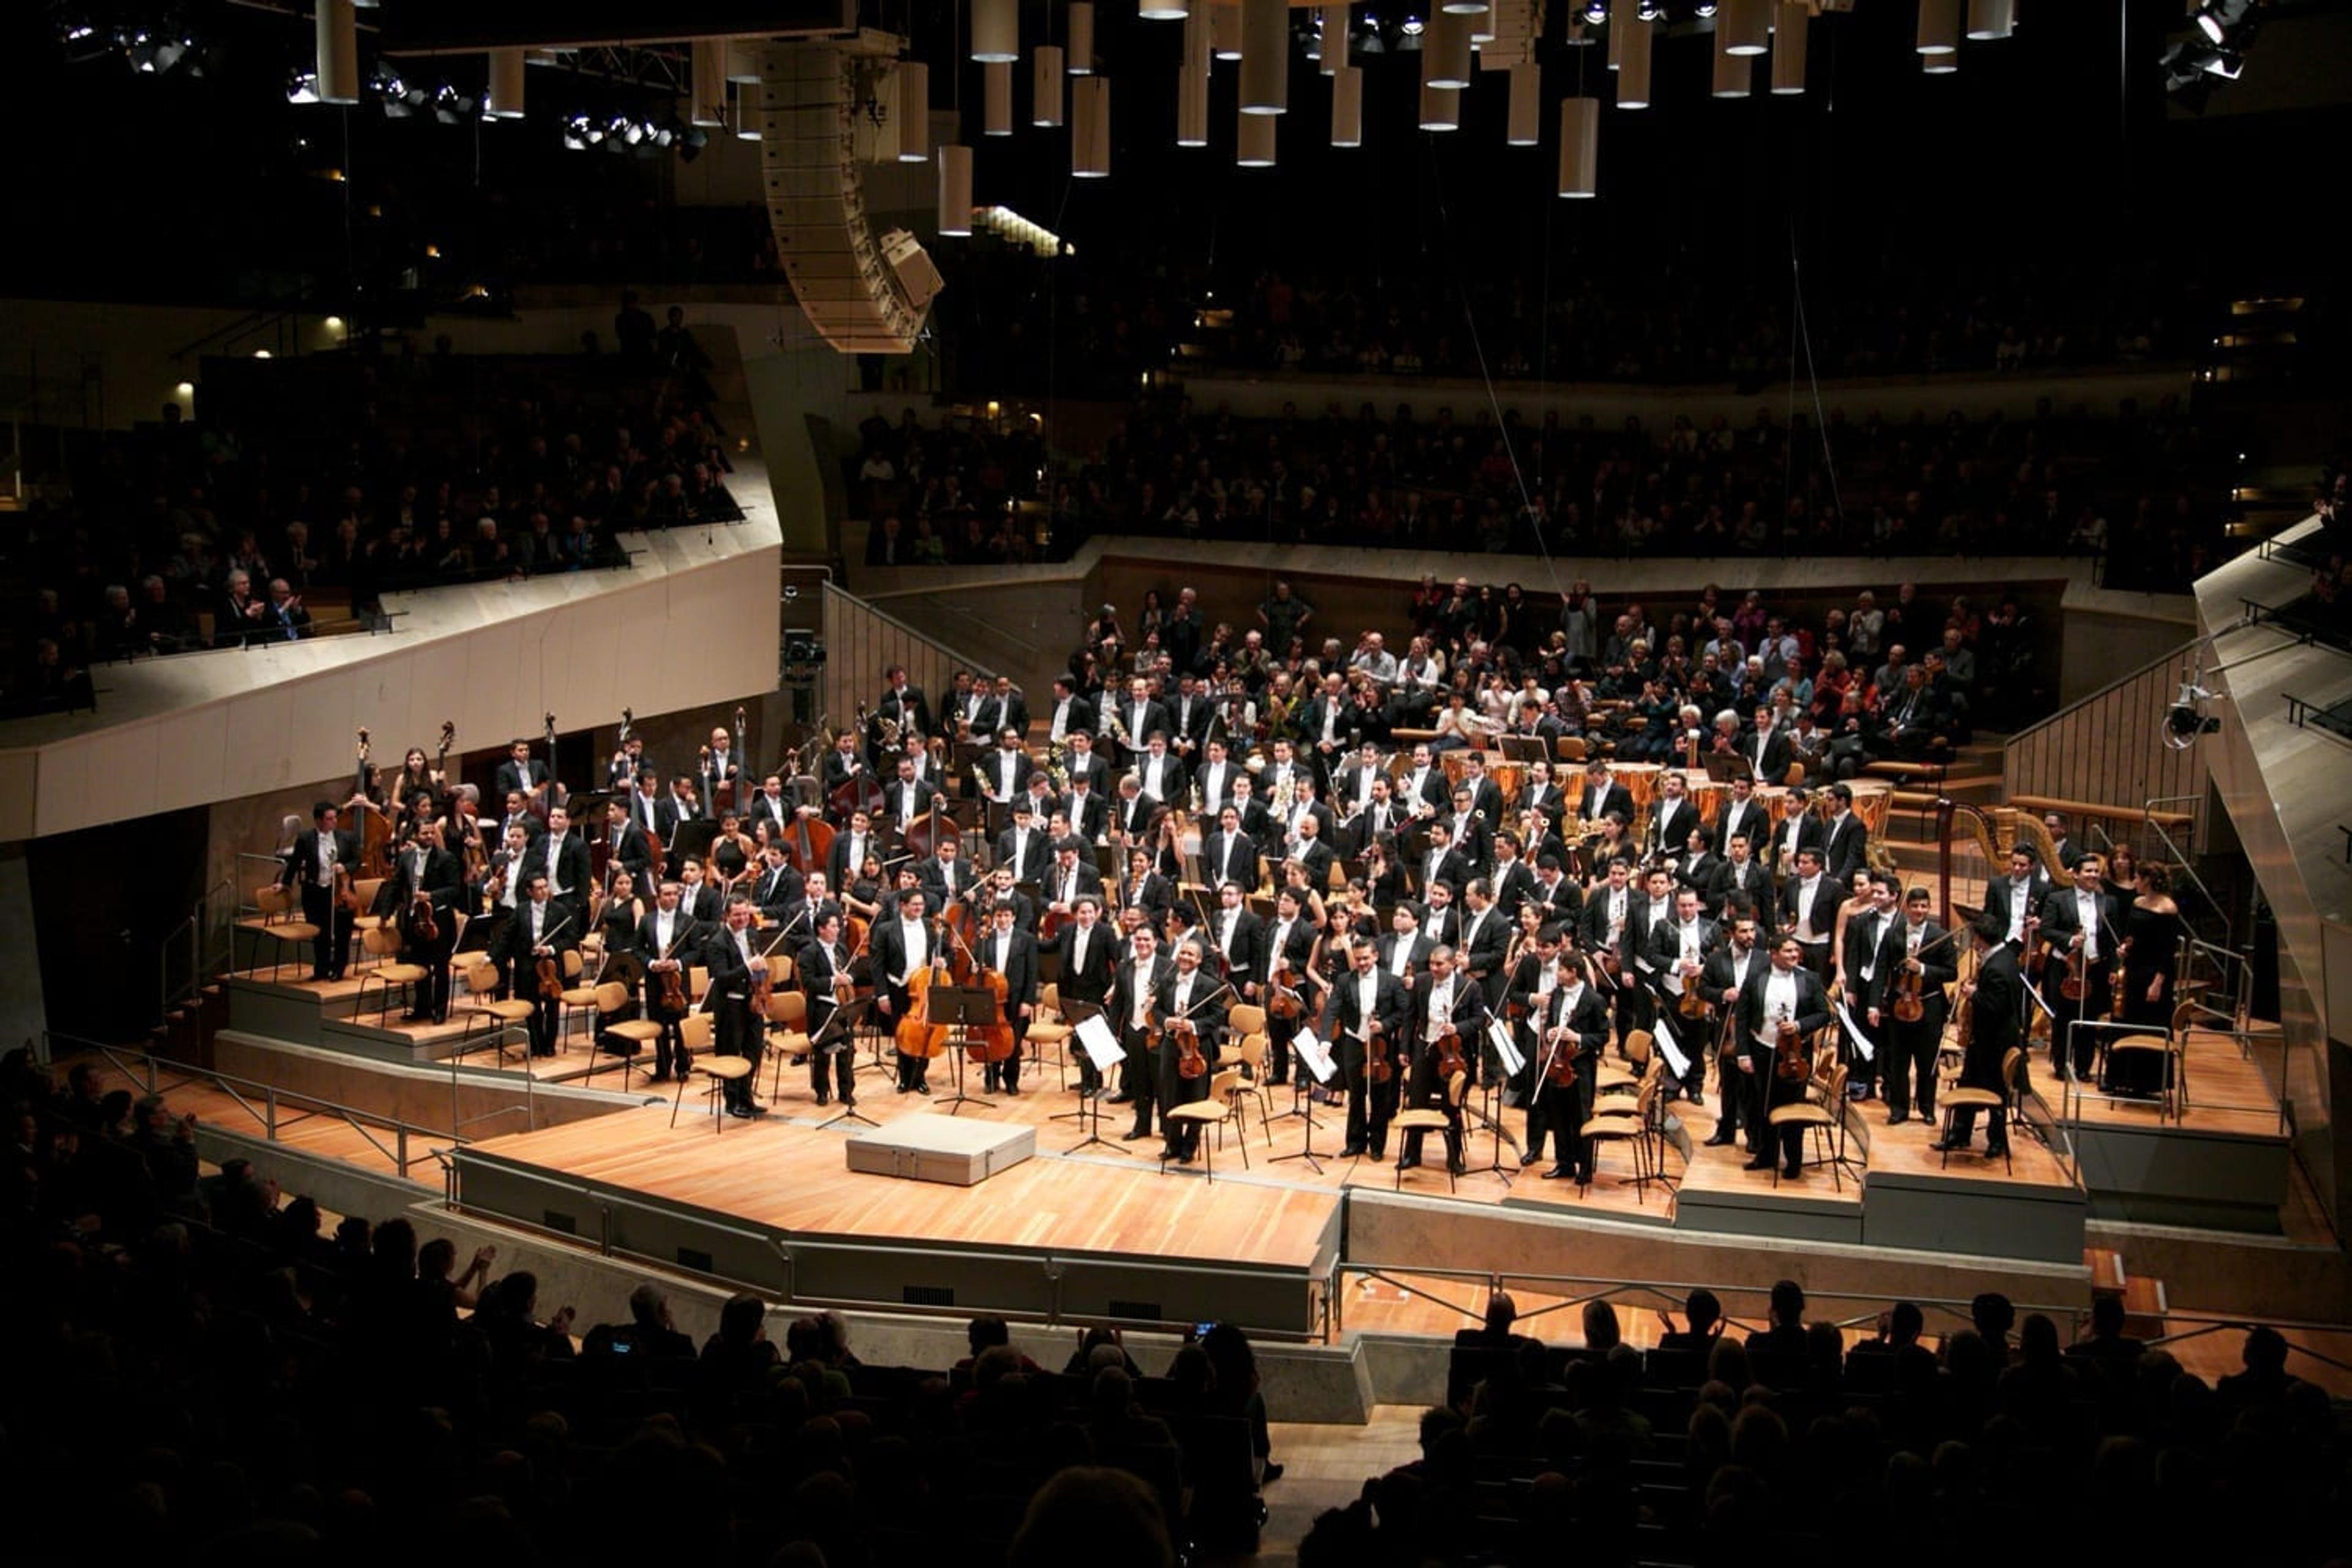 Musicians of the Simon Bolivar orchestra on stage at the Philharmonie in Berlin